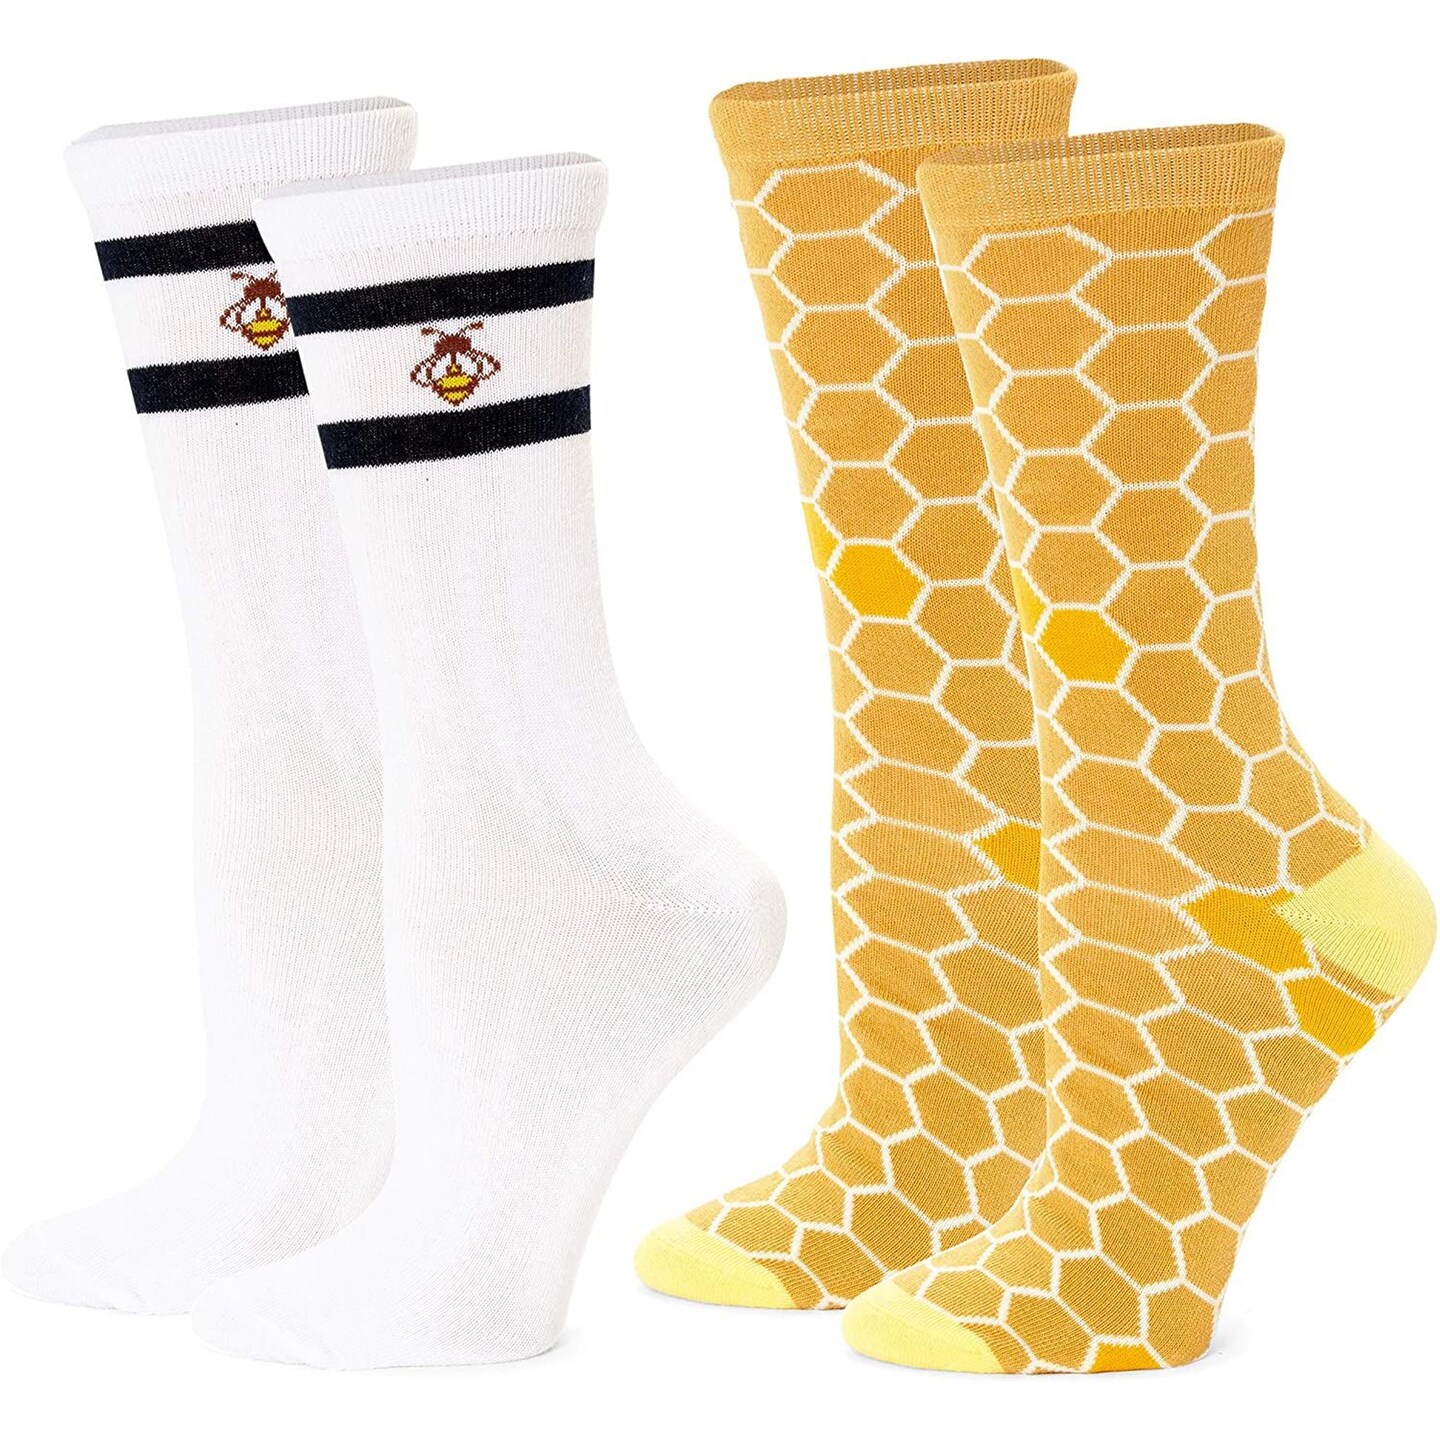 2-Pair Bee Cute Crew Socks for Women Dress up Boots Sneakers (One Size)